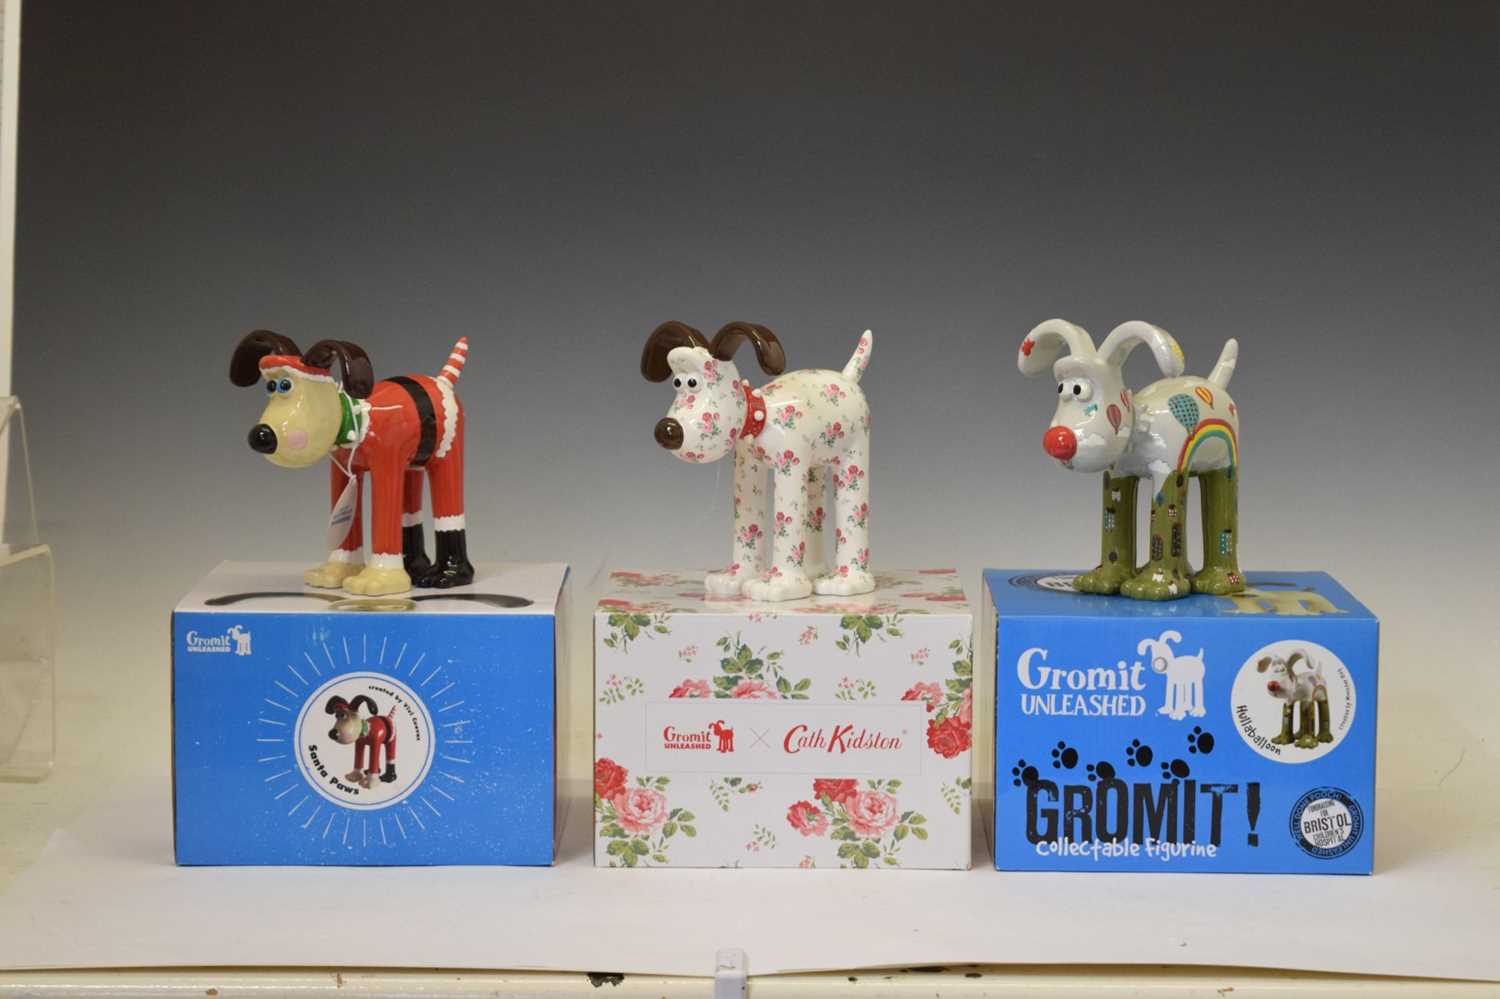 Aardman/Wallace and Gromit - 'Gromit Unleashed' figures - Image 11 of 11